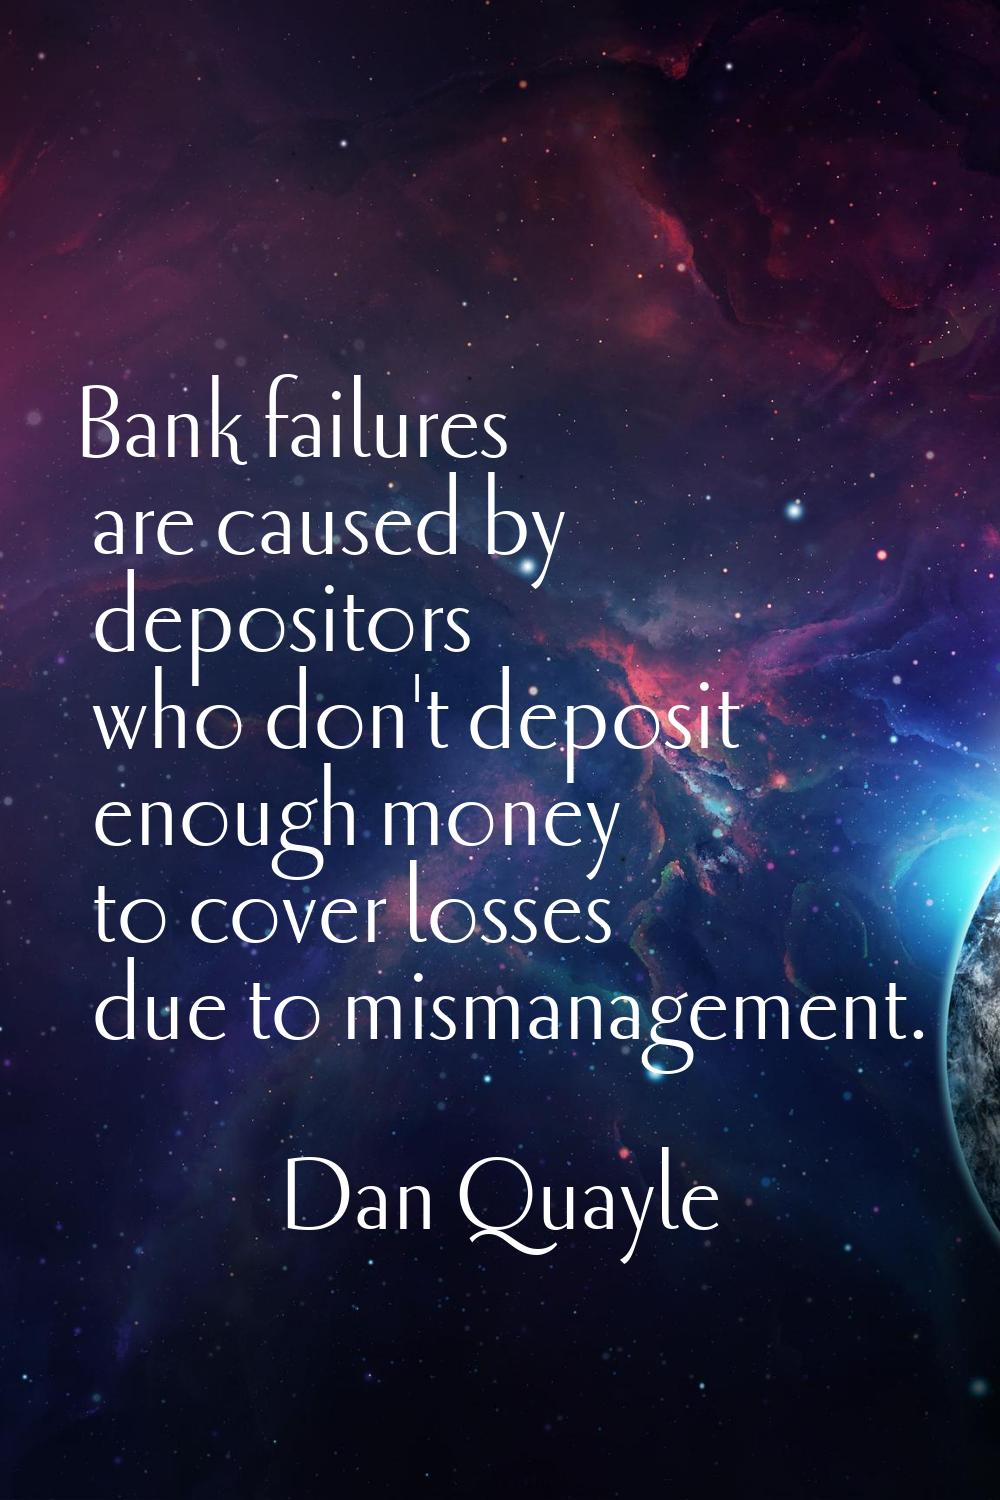 Bank failures are caused by depositors who don't deposit enough money to cover losses due to misman